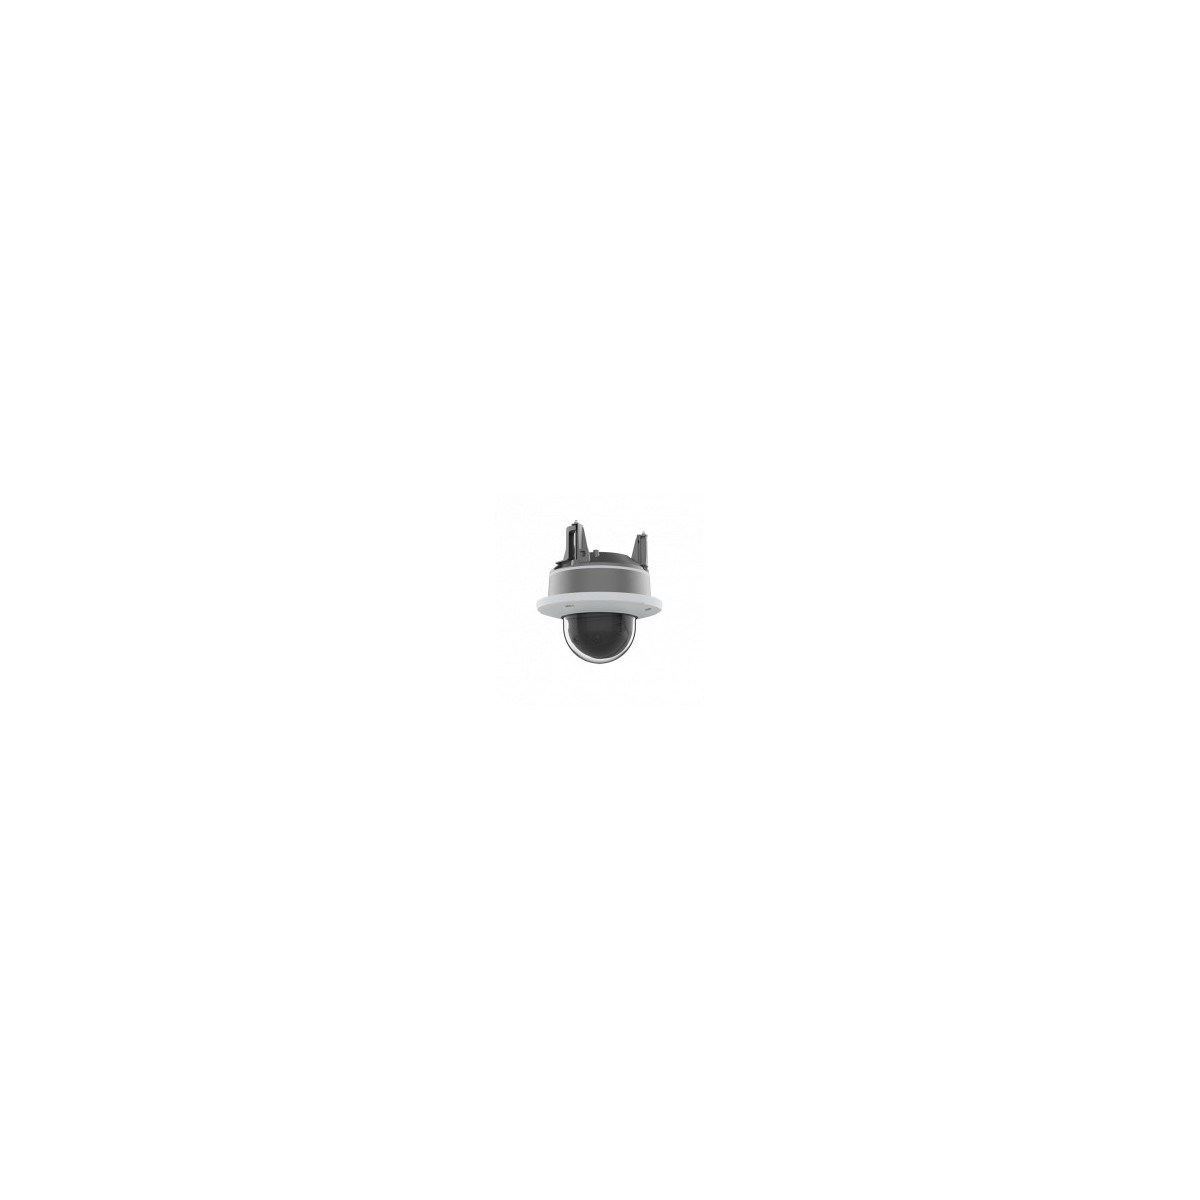 Axis TQ3201-E Recessed Mount 02136-001